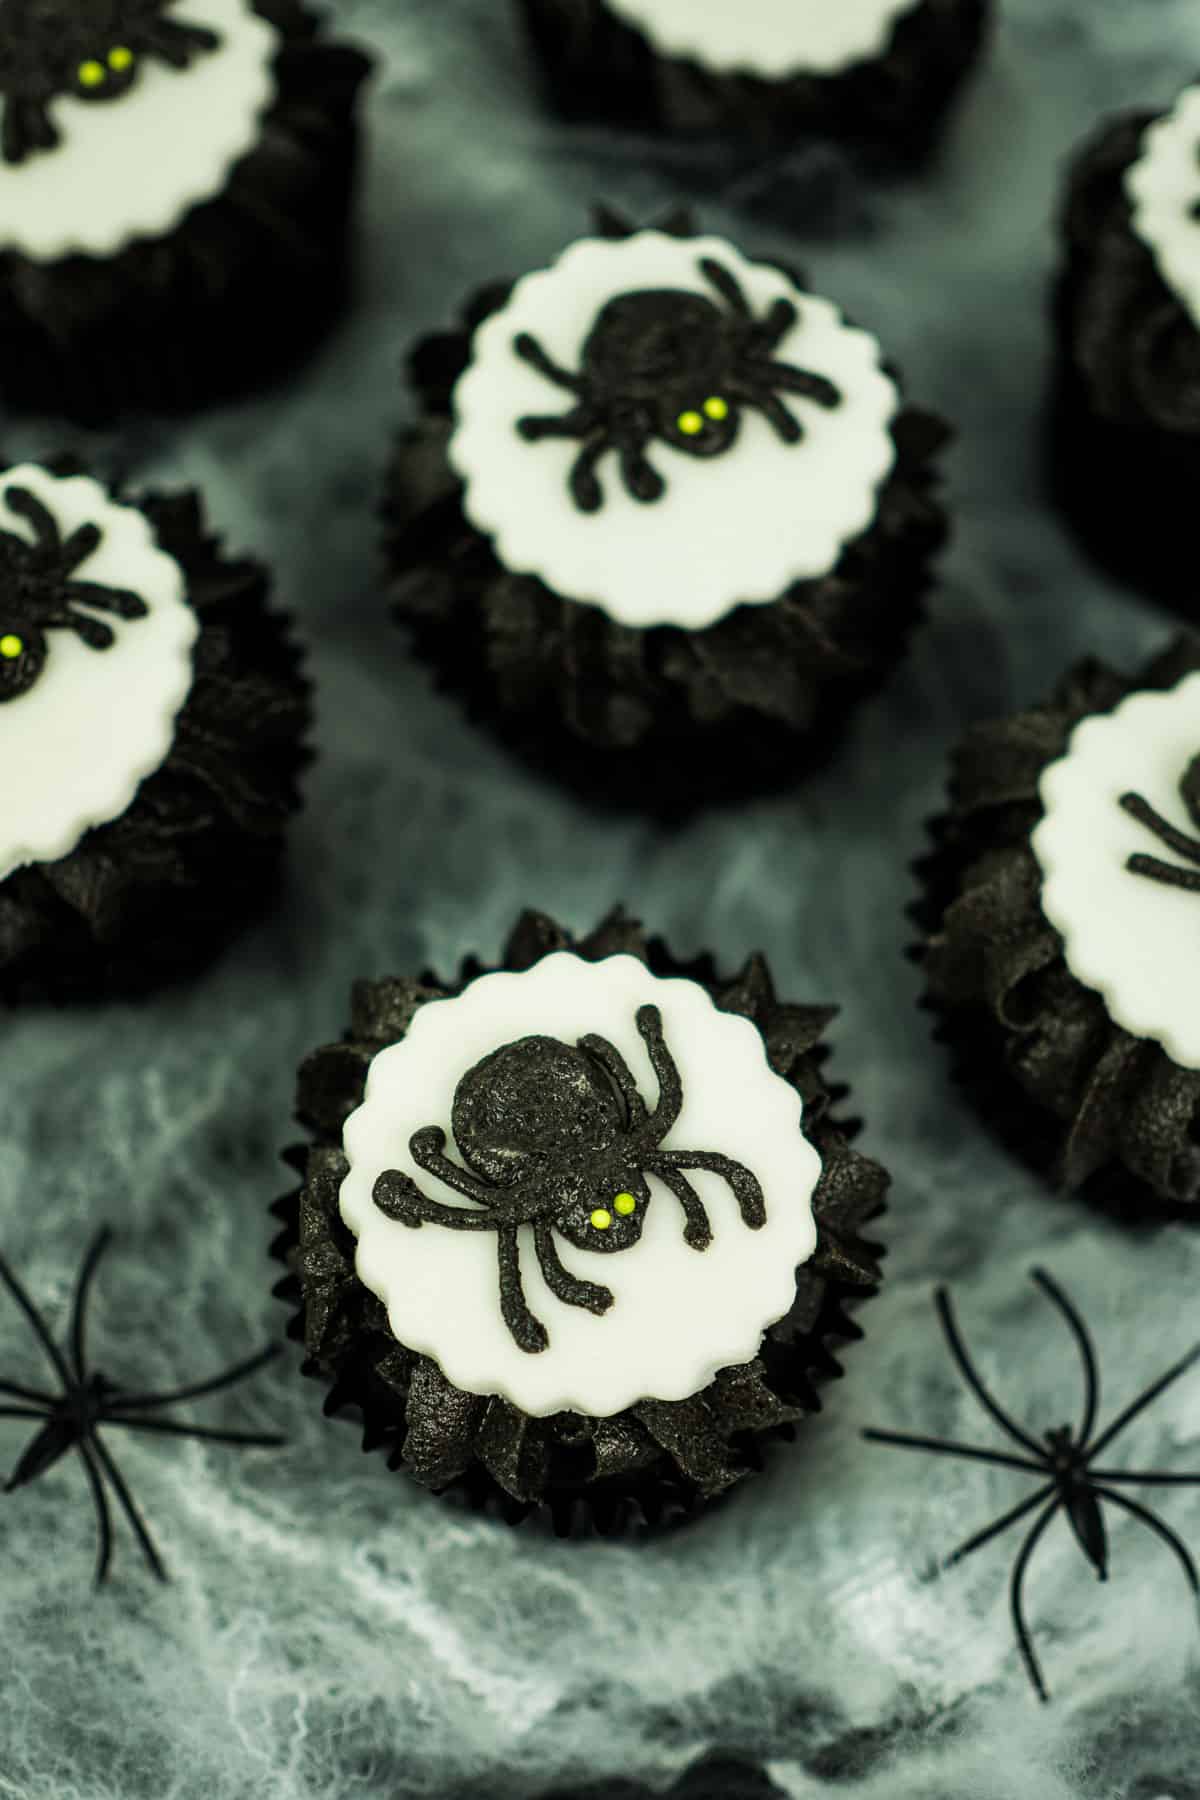 Chocolate cupcakes in black cupcake liners, decorated with black frosting, white fondant cut out and black buttercream spiders.